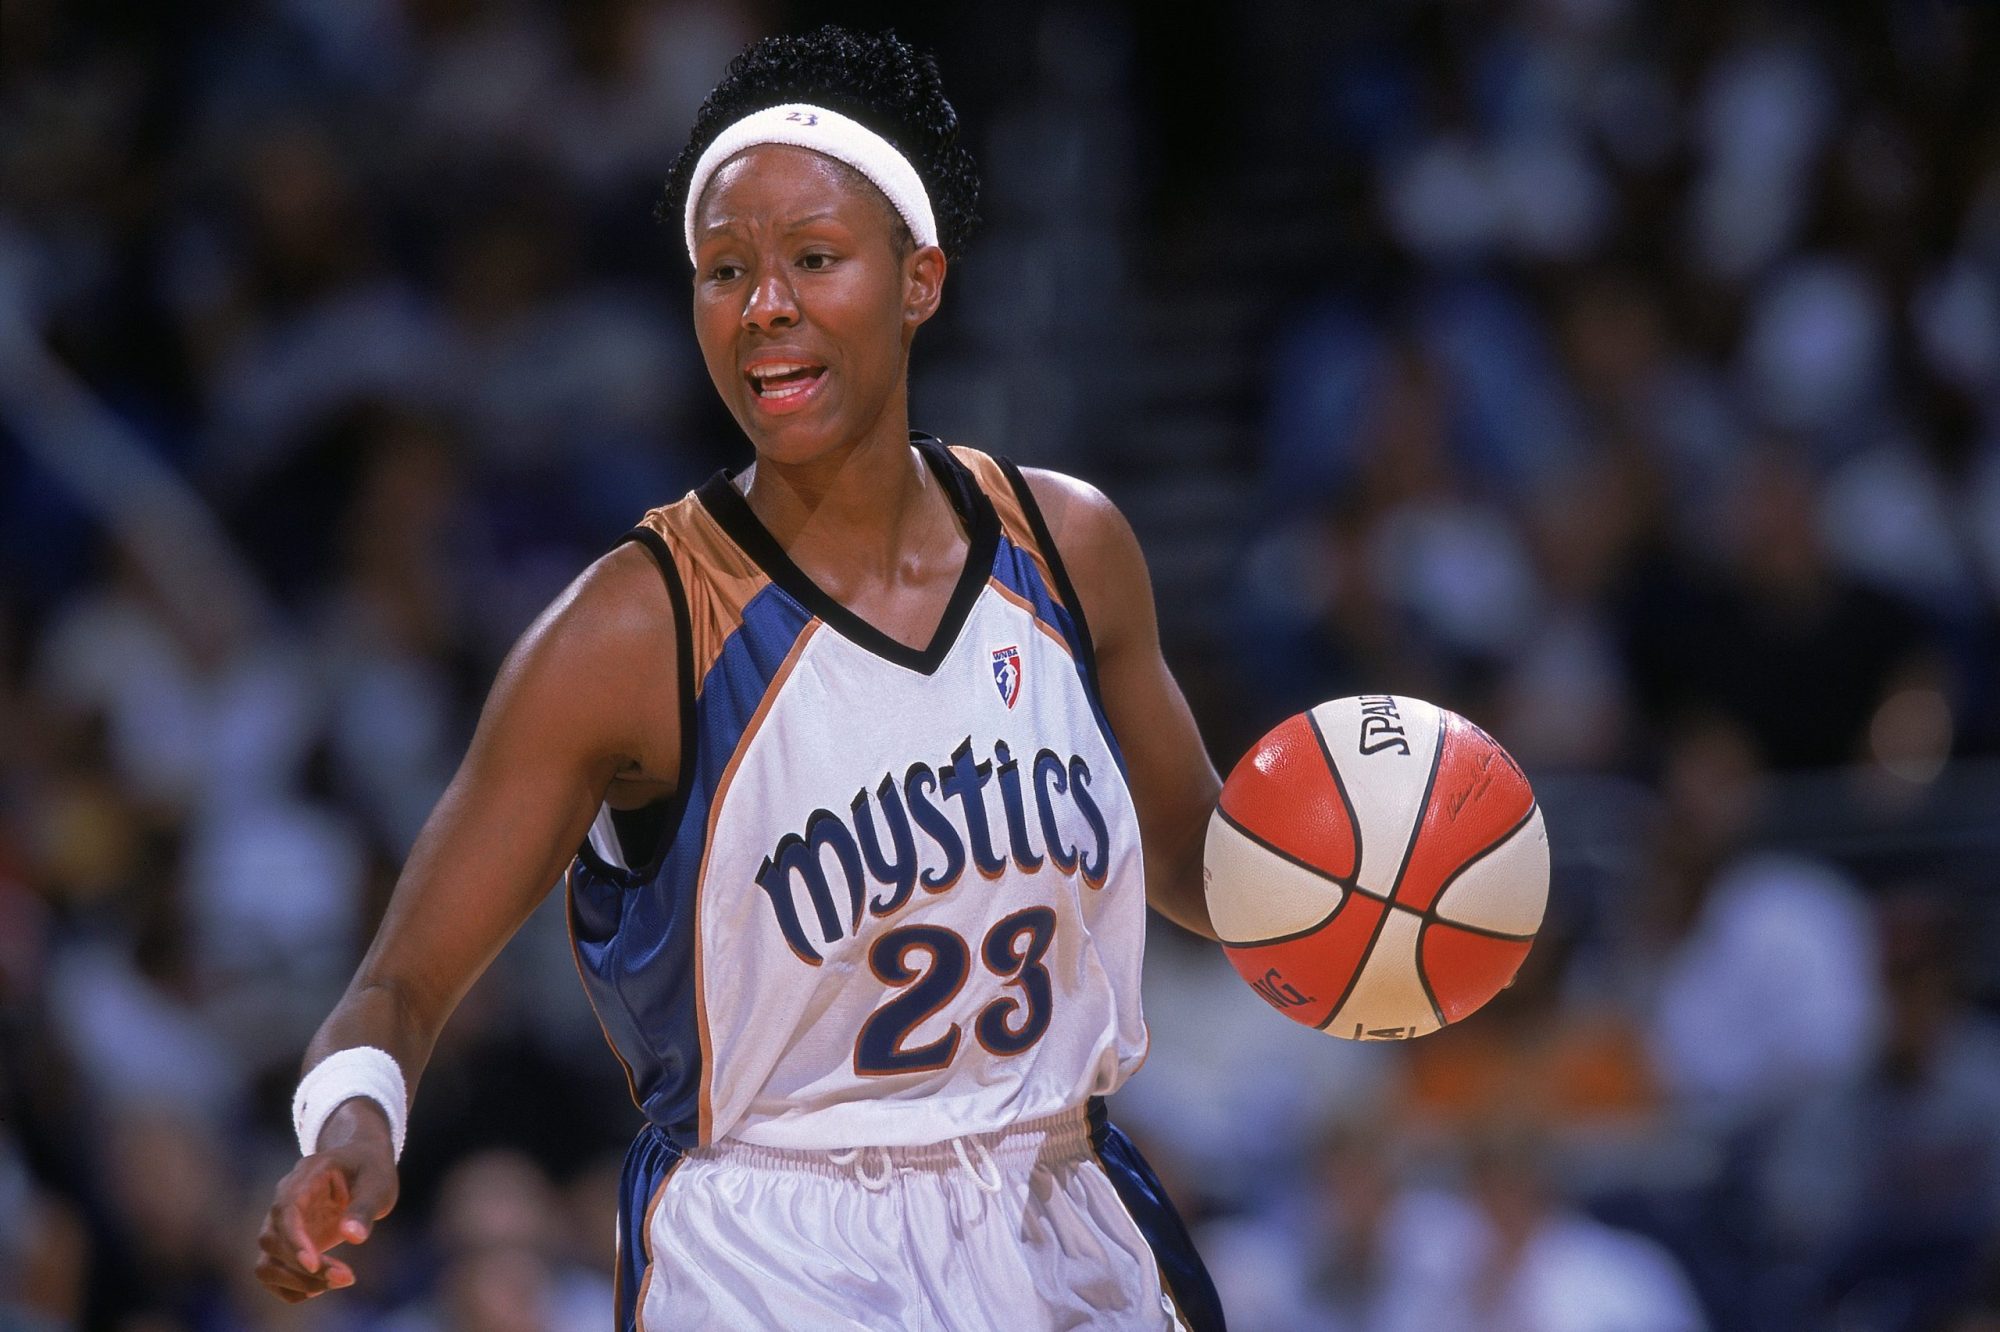 Chamique Holdsclaw #23 of the Washington Mystics with the ball during the WNBA game against the Portland Fire at the MCI Center in Washington, D.C. Credit: Doug Pensinger/Allsport